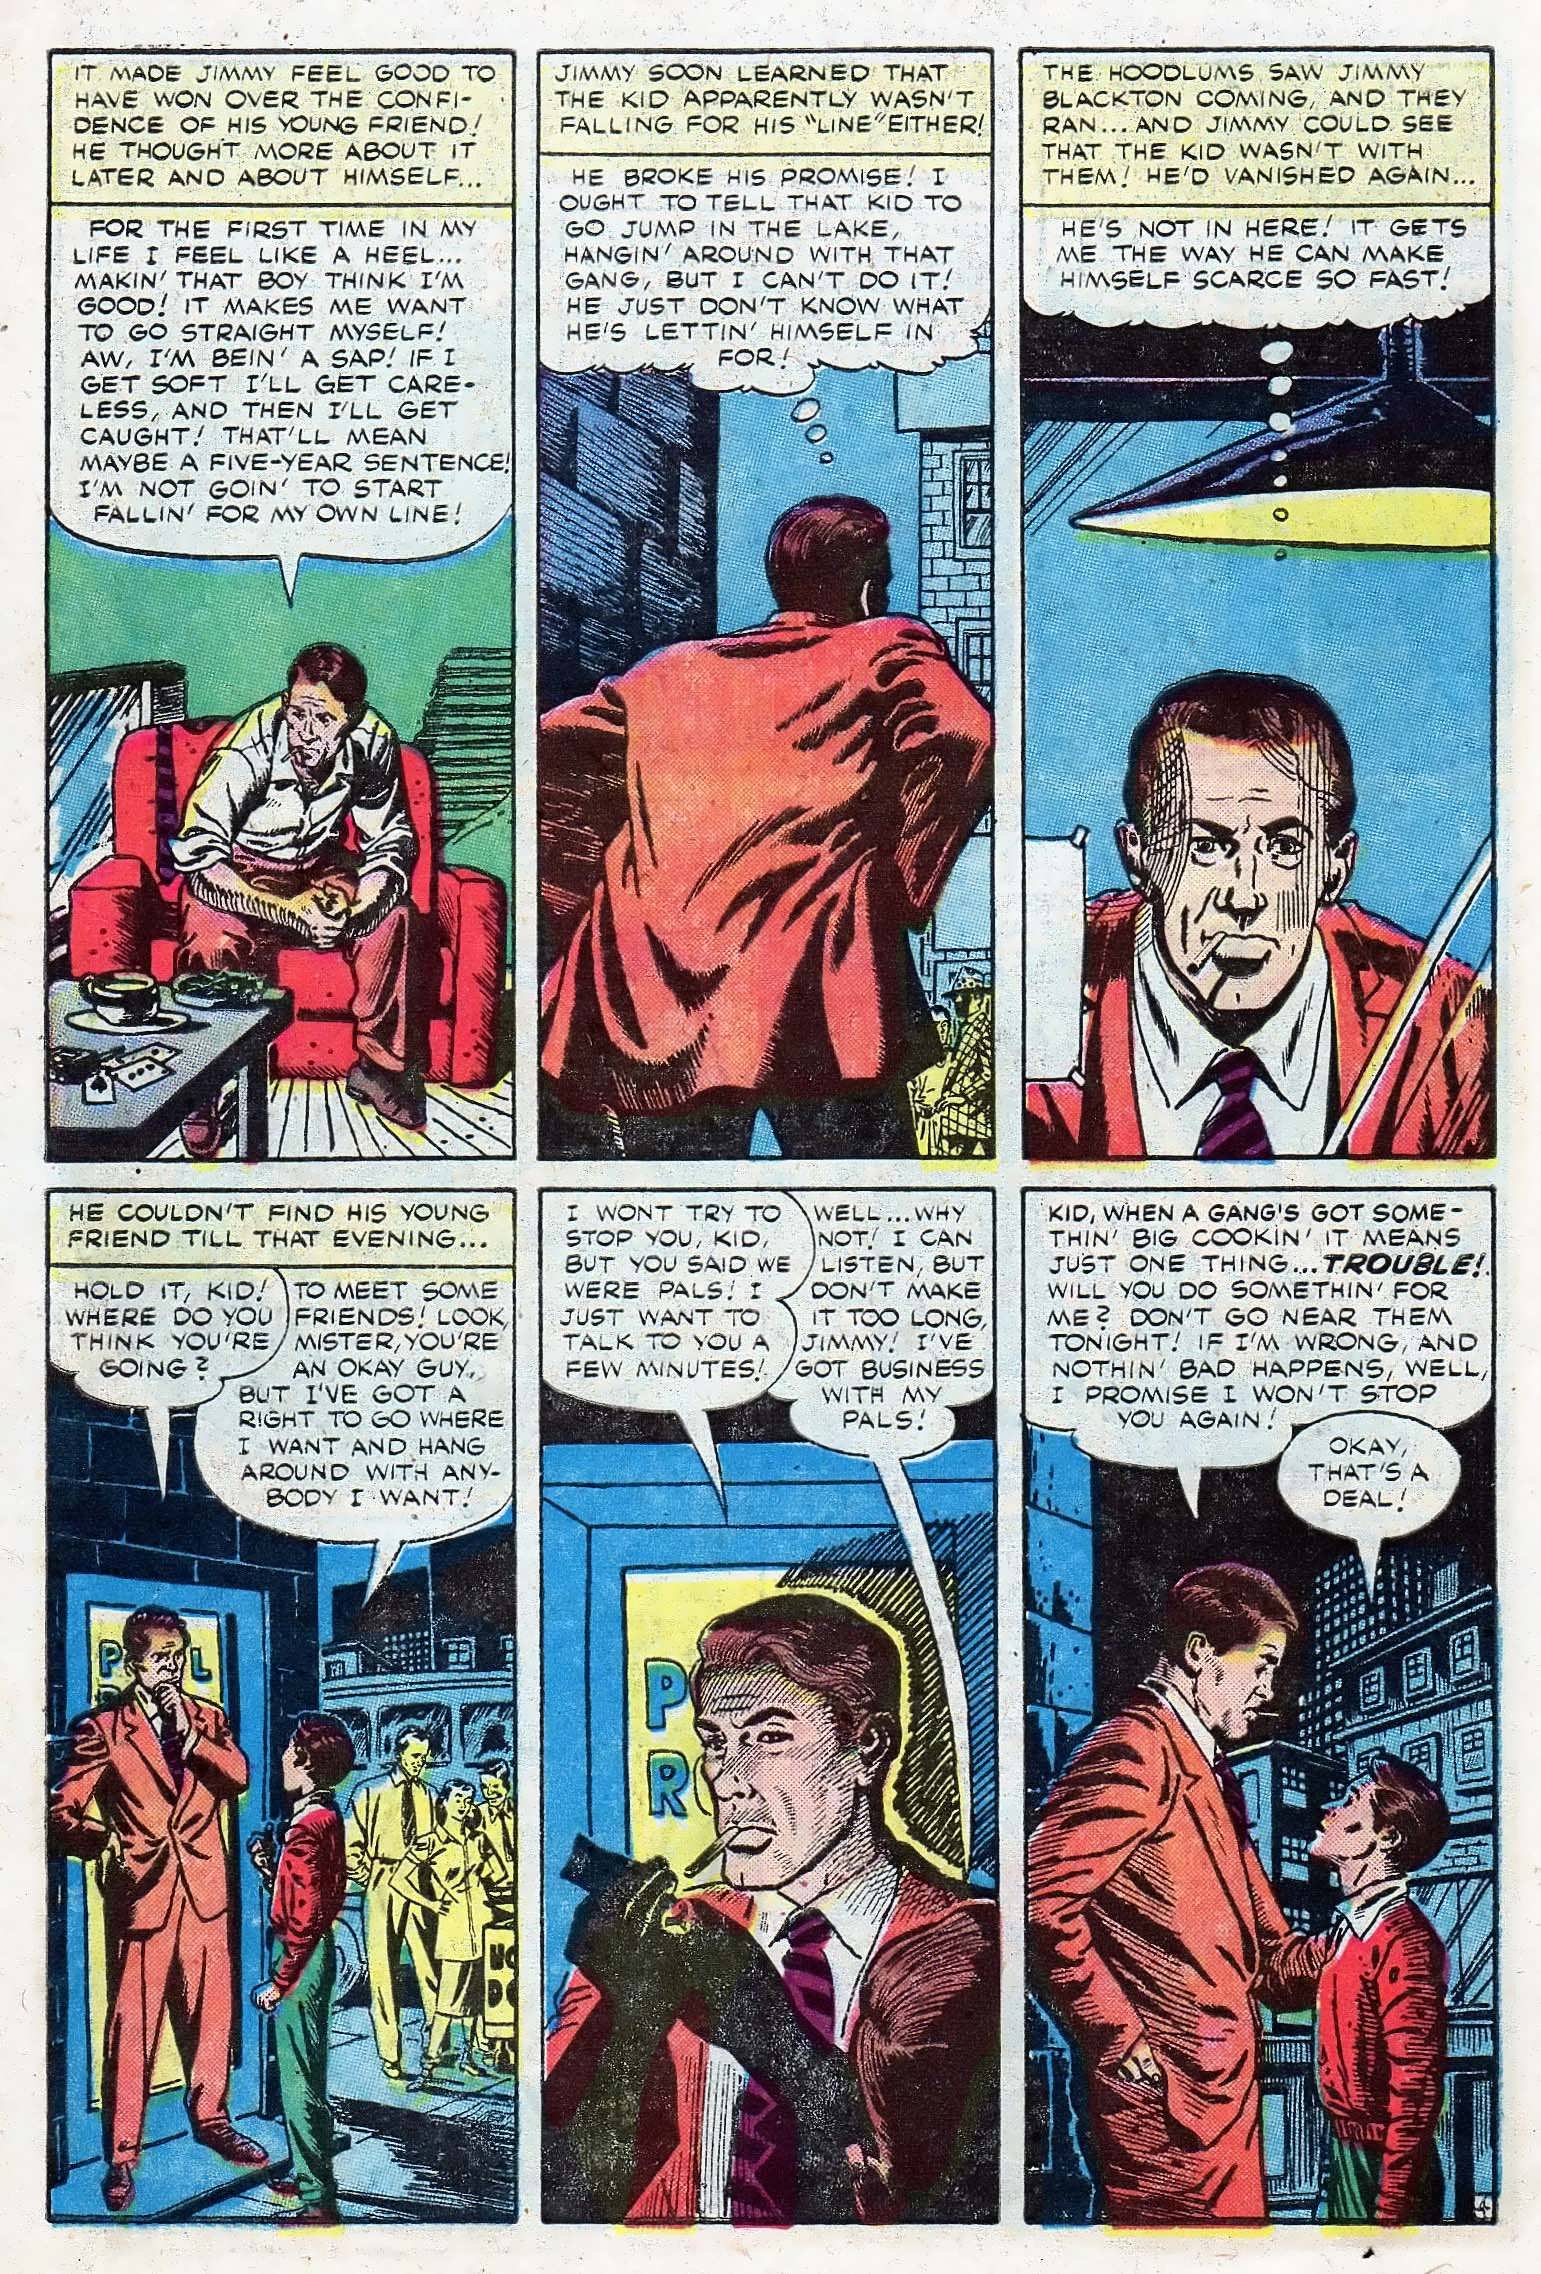 Marvel Tales (1949) 142 Page 5